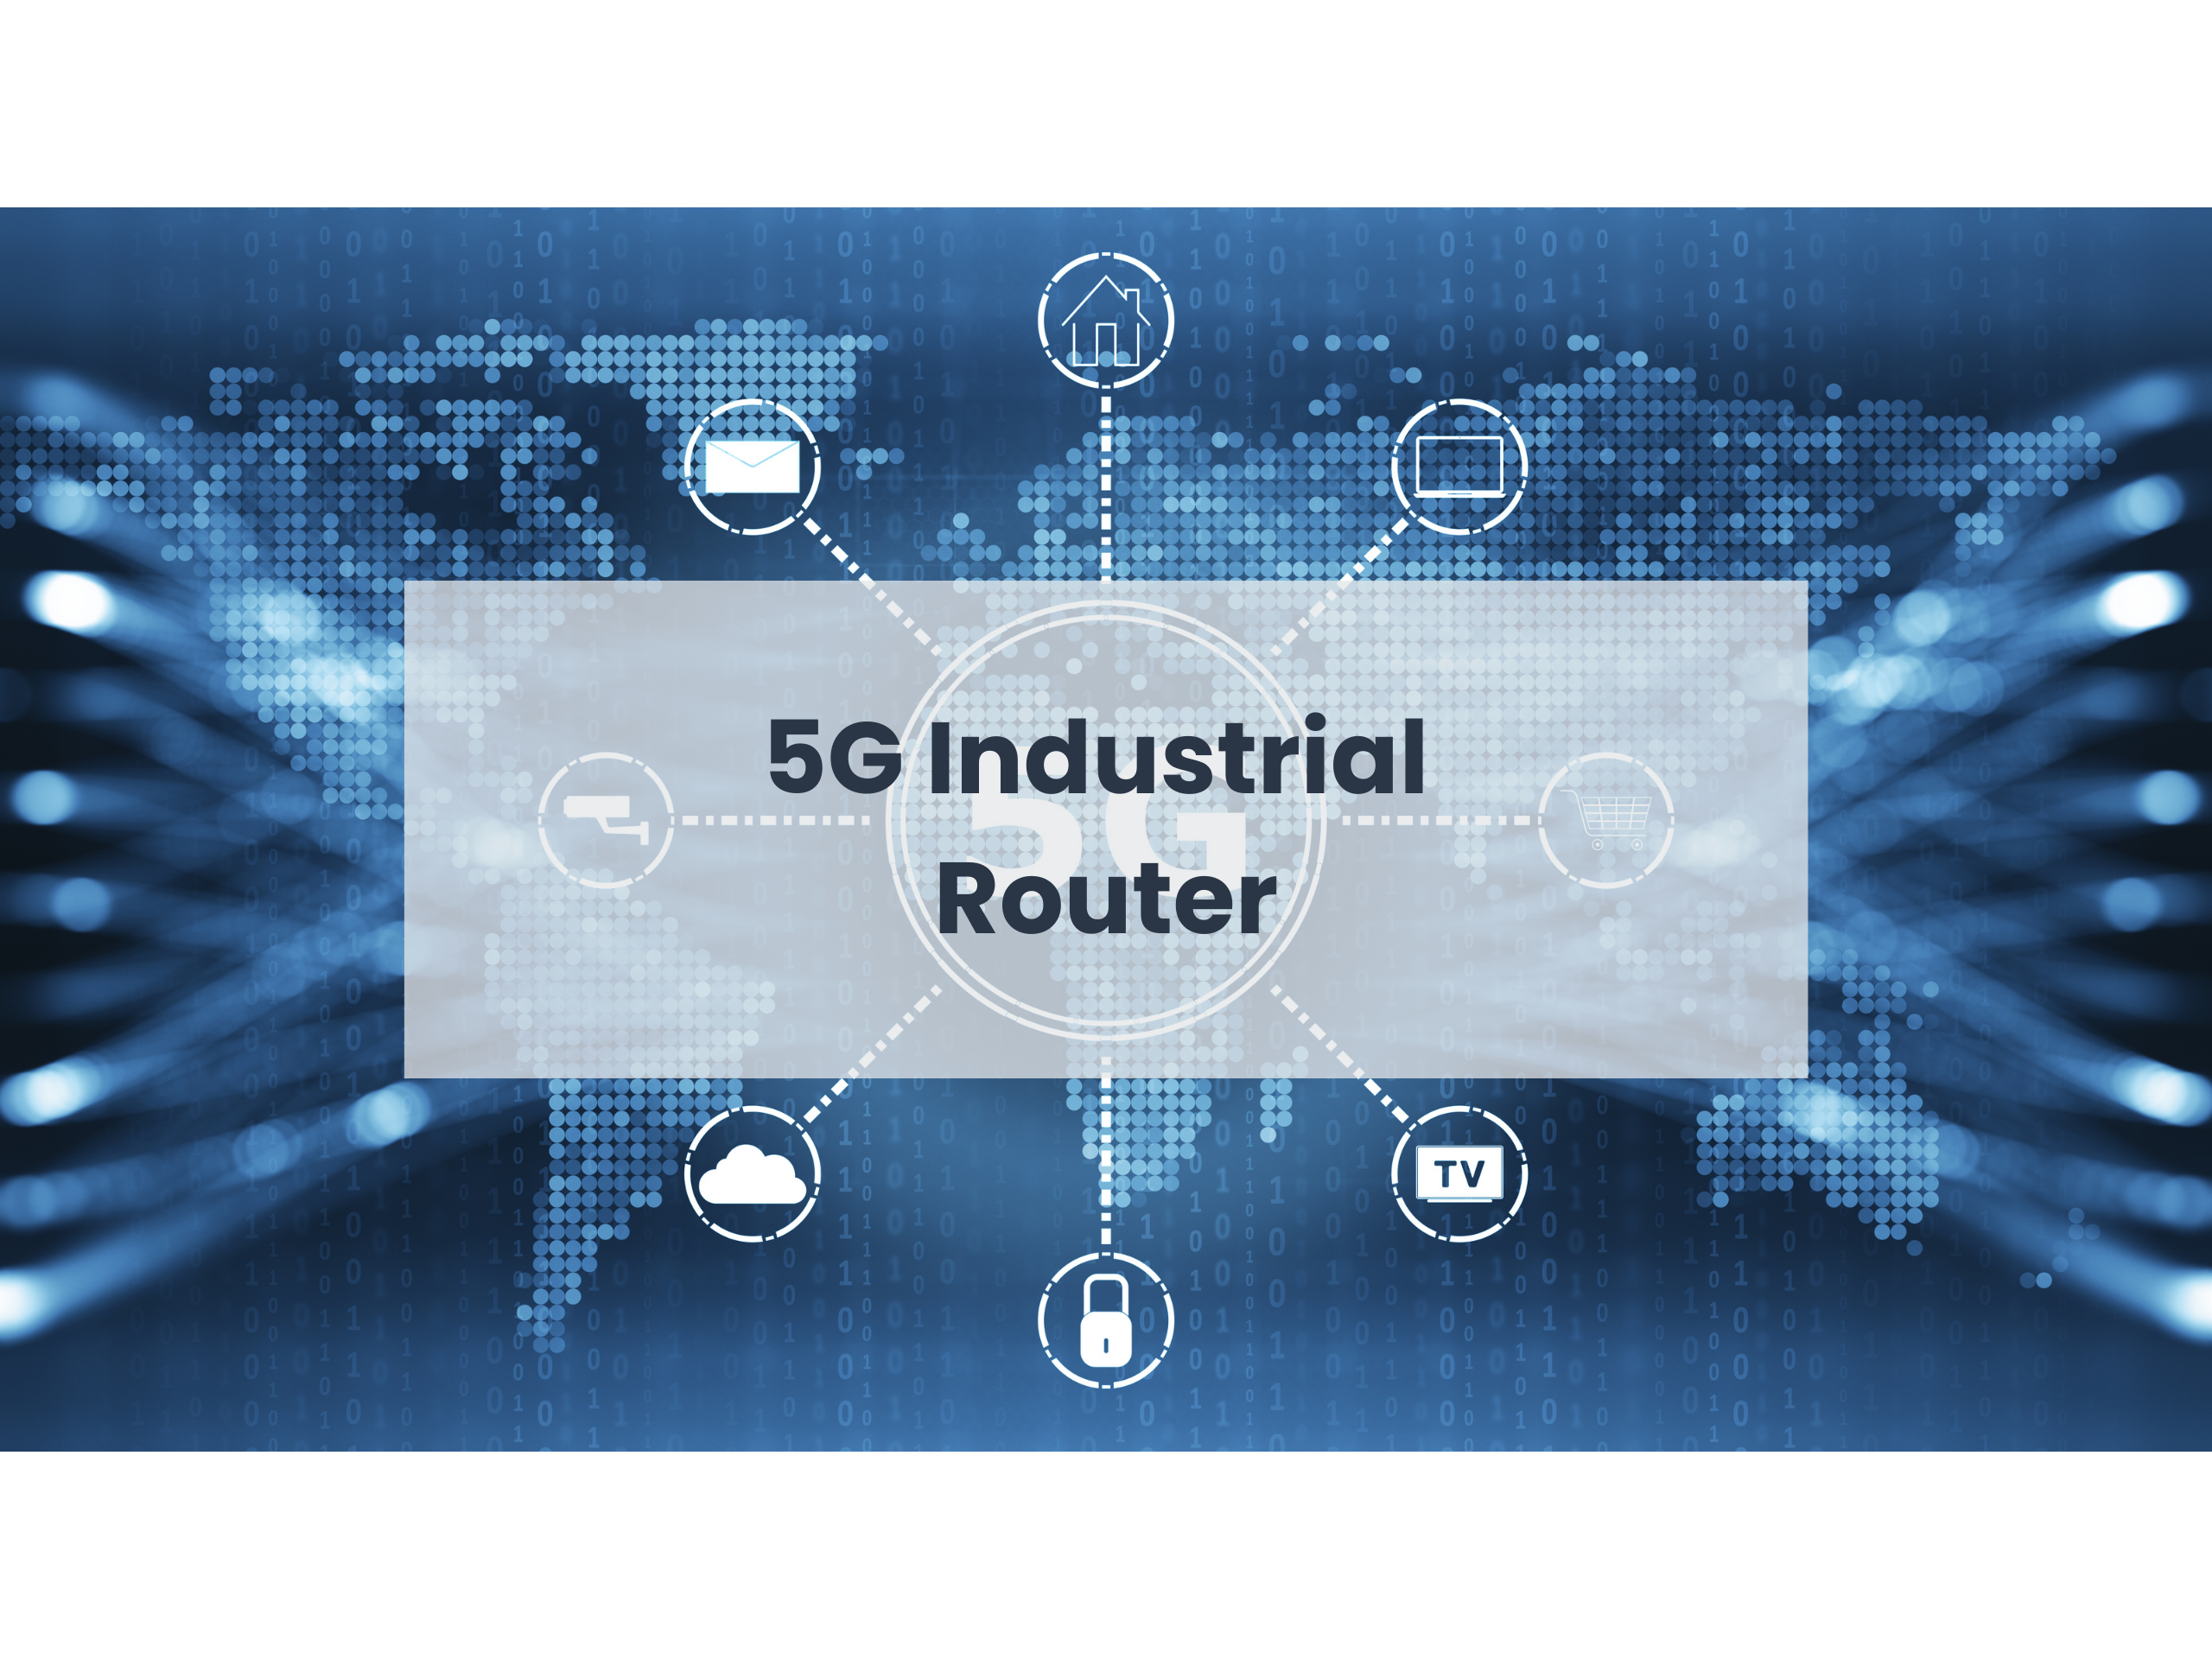 5G Industrial router